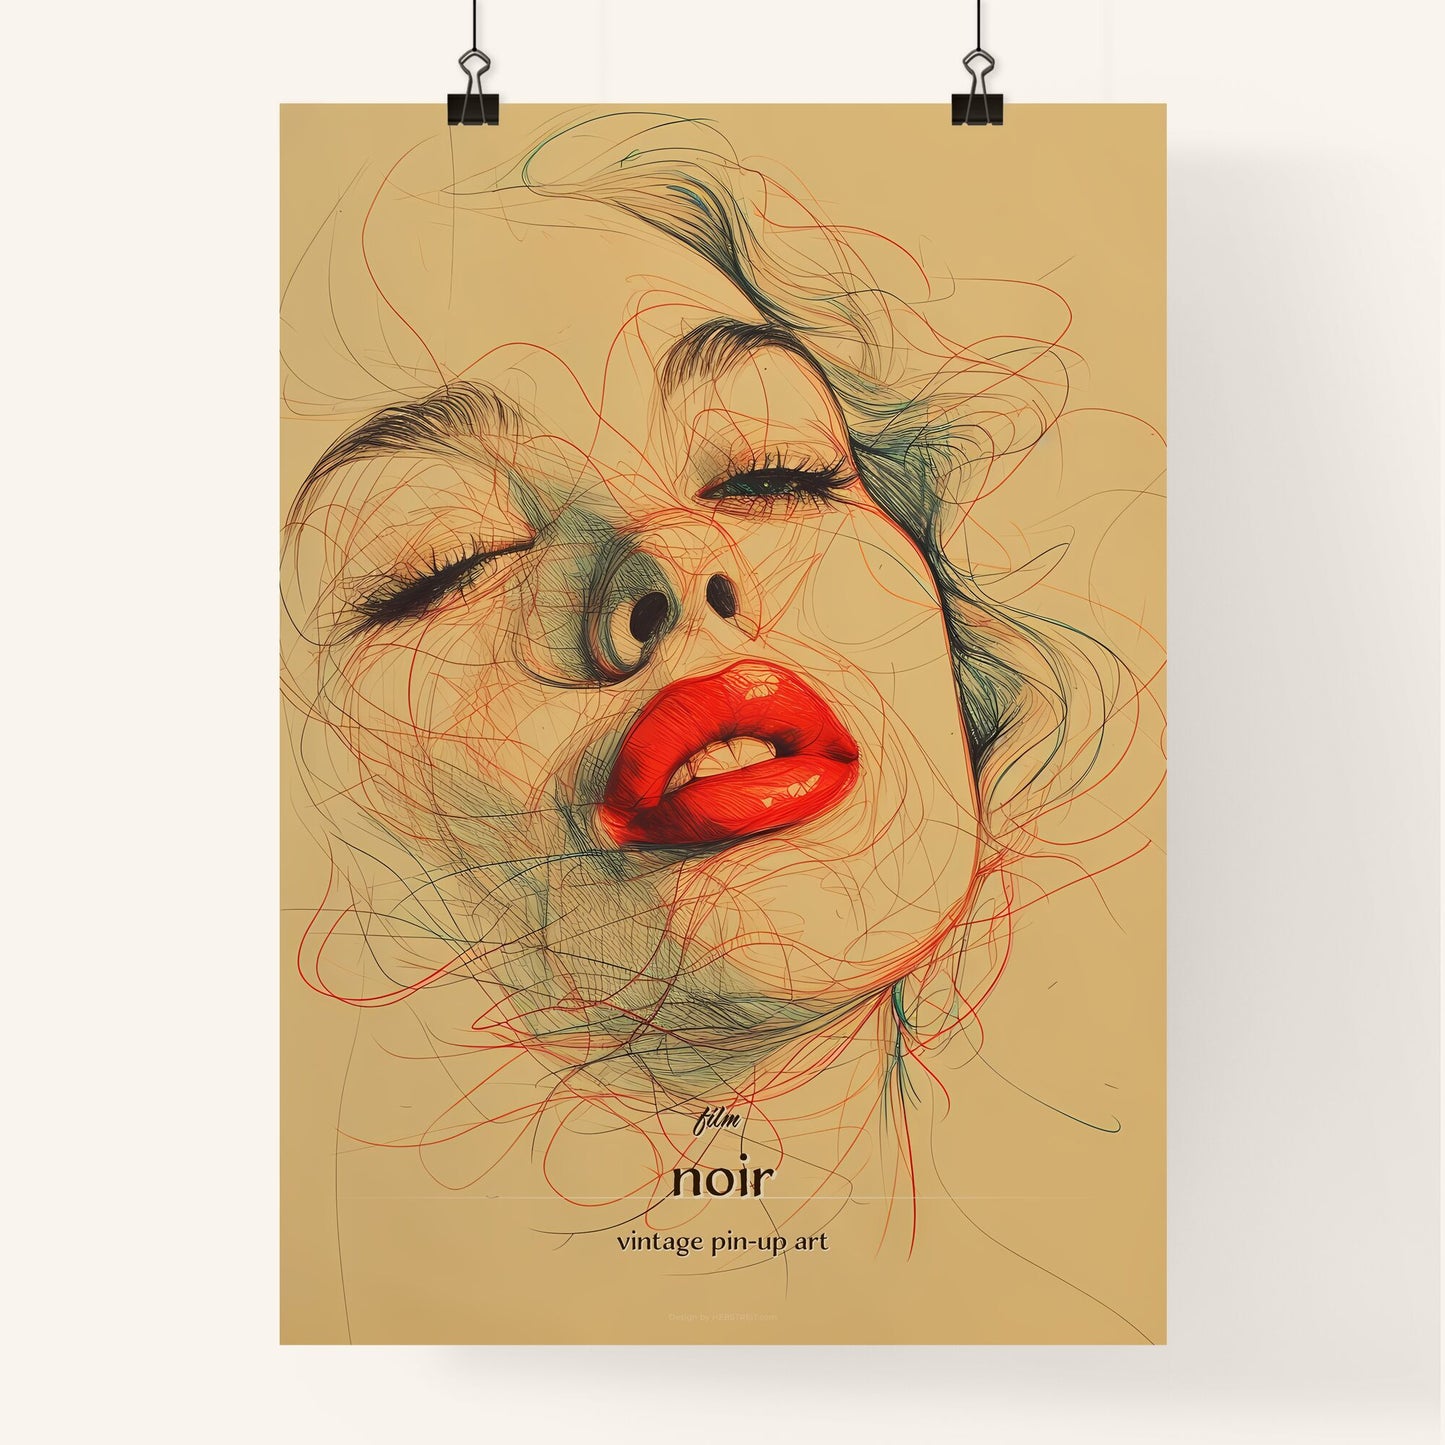 film, noir, vintage pin-up art, A Poster of a drawing of a woman_s face Default Title